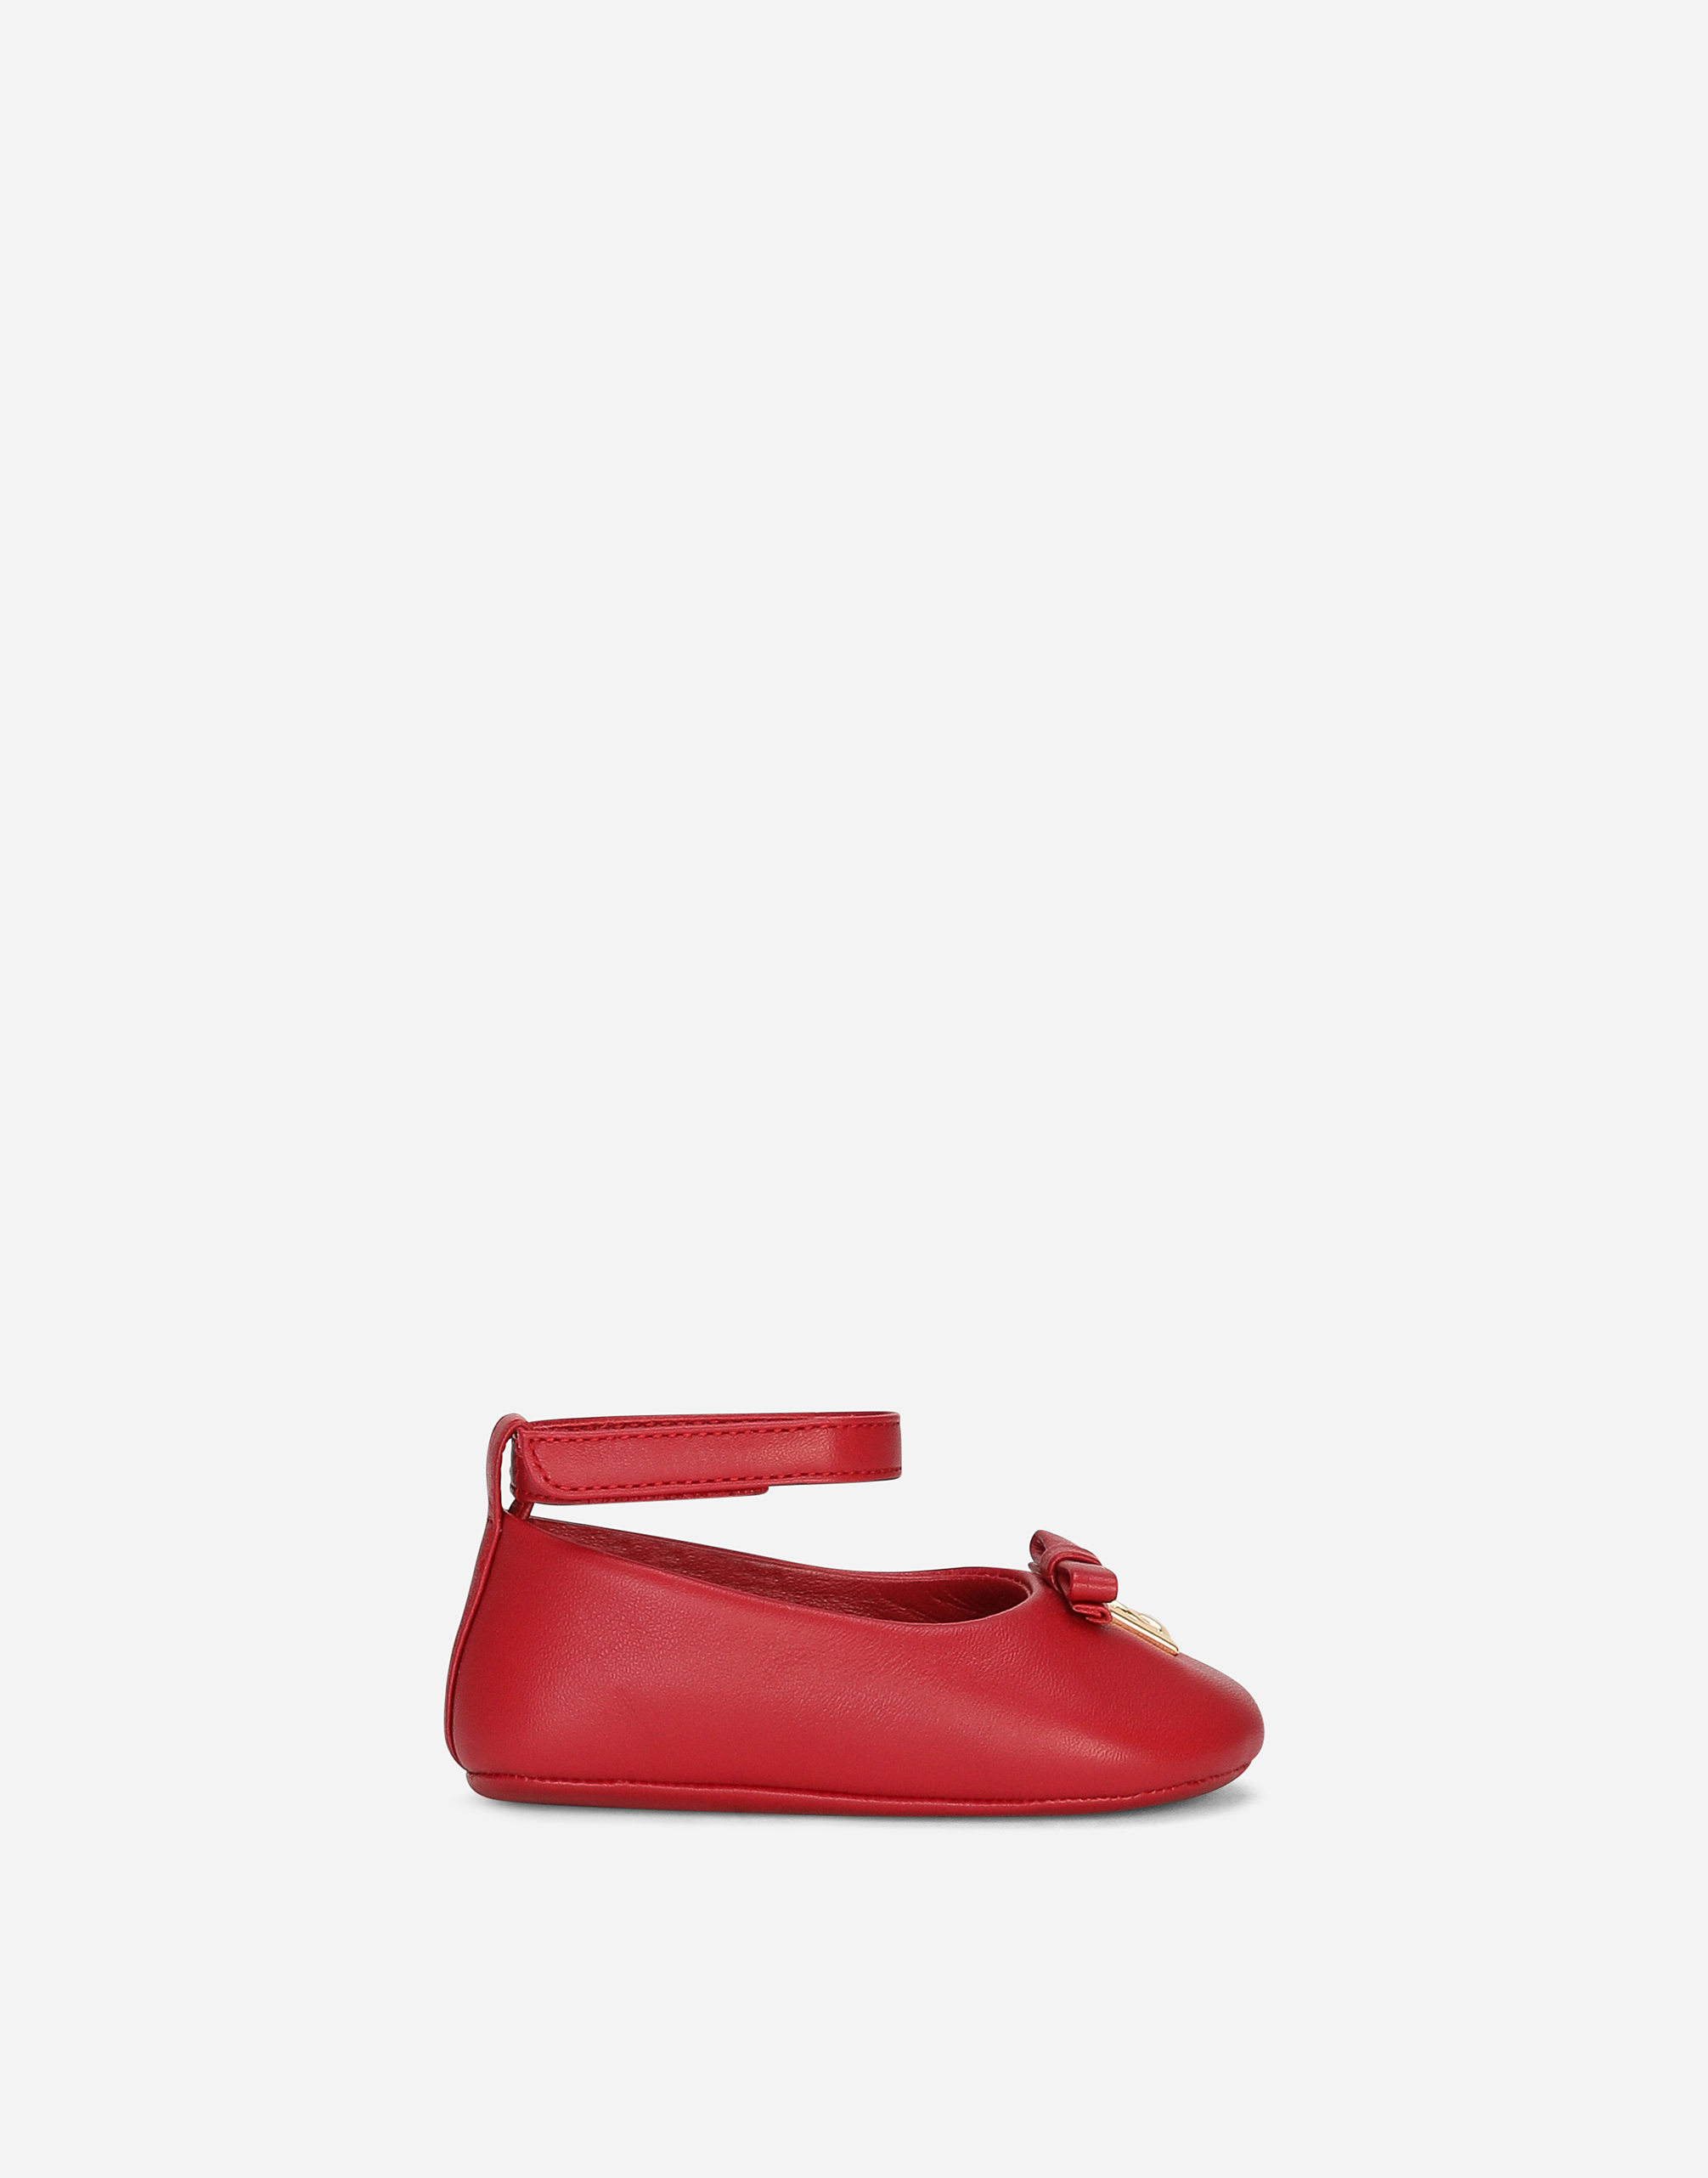 Nappa leather ballet flats in Red